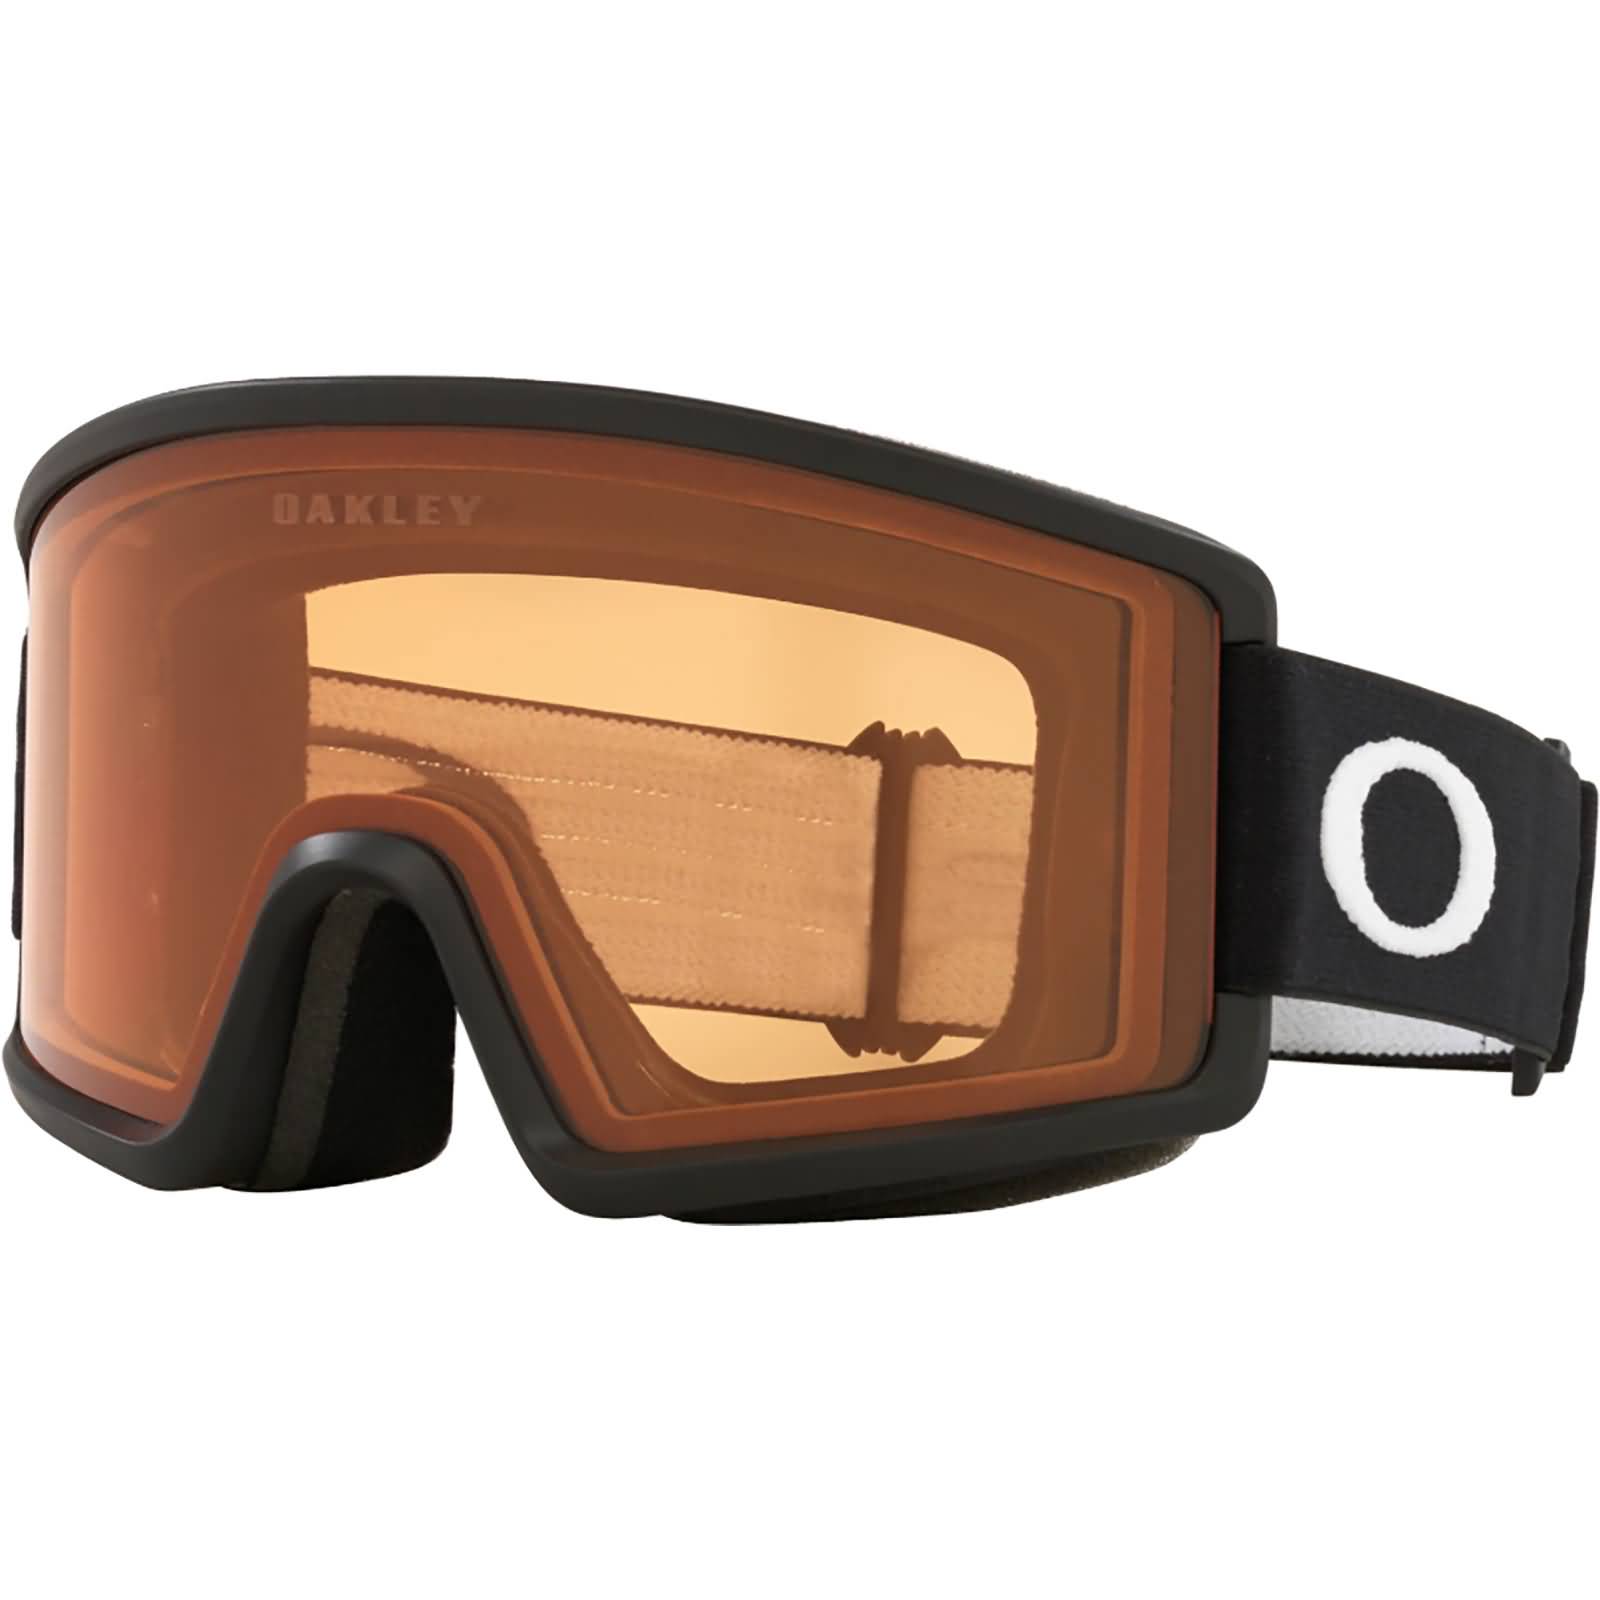 Oakley Target Line M Adult Snow Goggles-OO7121